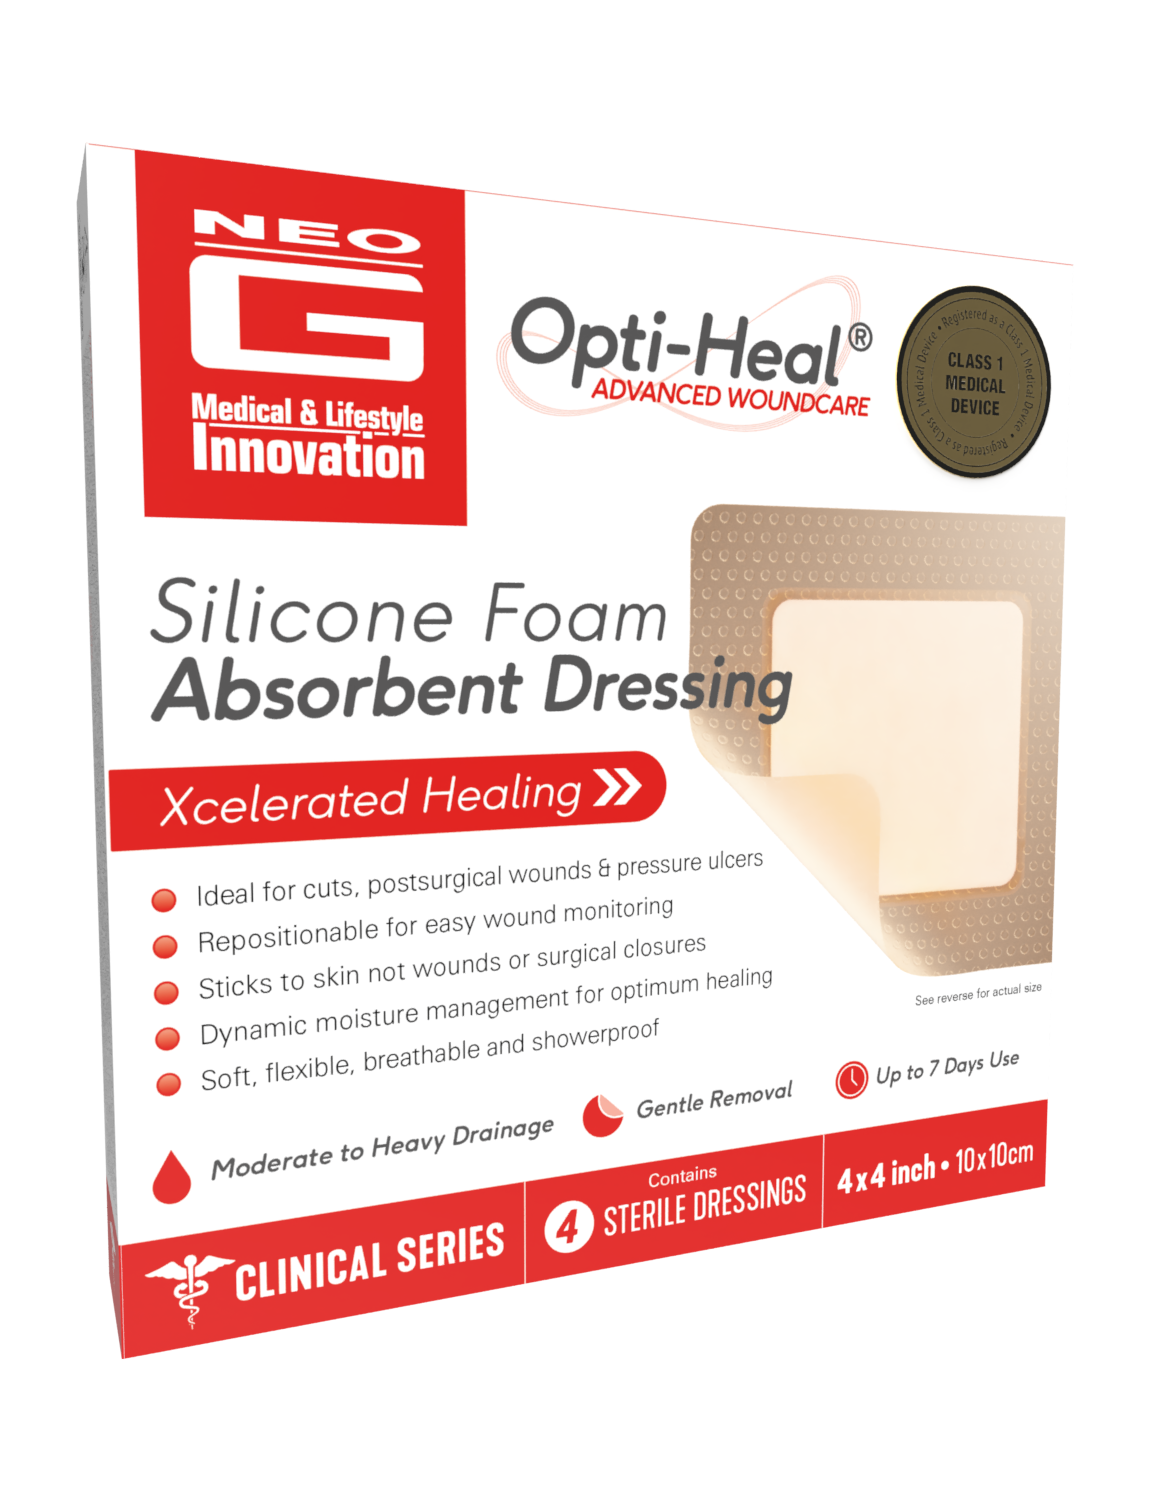 Foam　Neo　Dressing　Silicone　G　Neo　G　–　Absorbent　Opti-Heal　USA